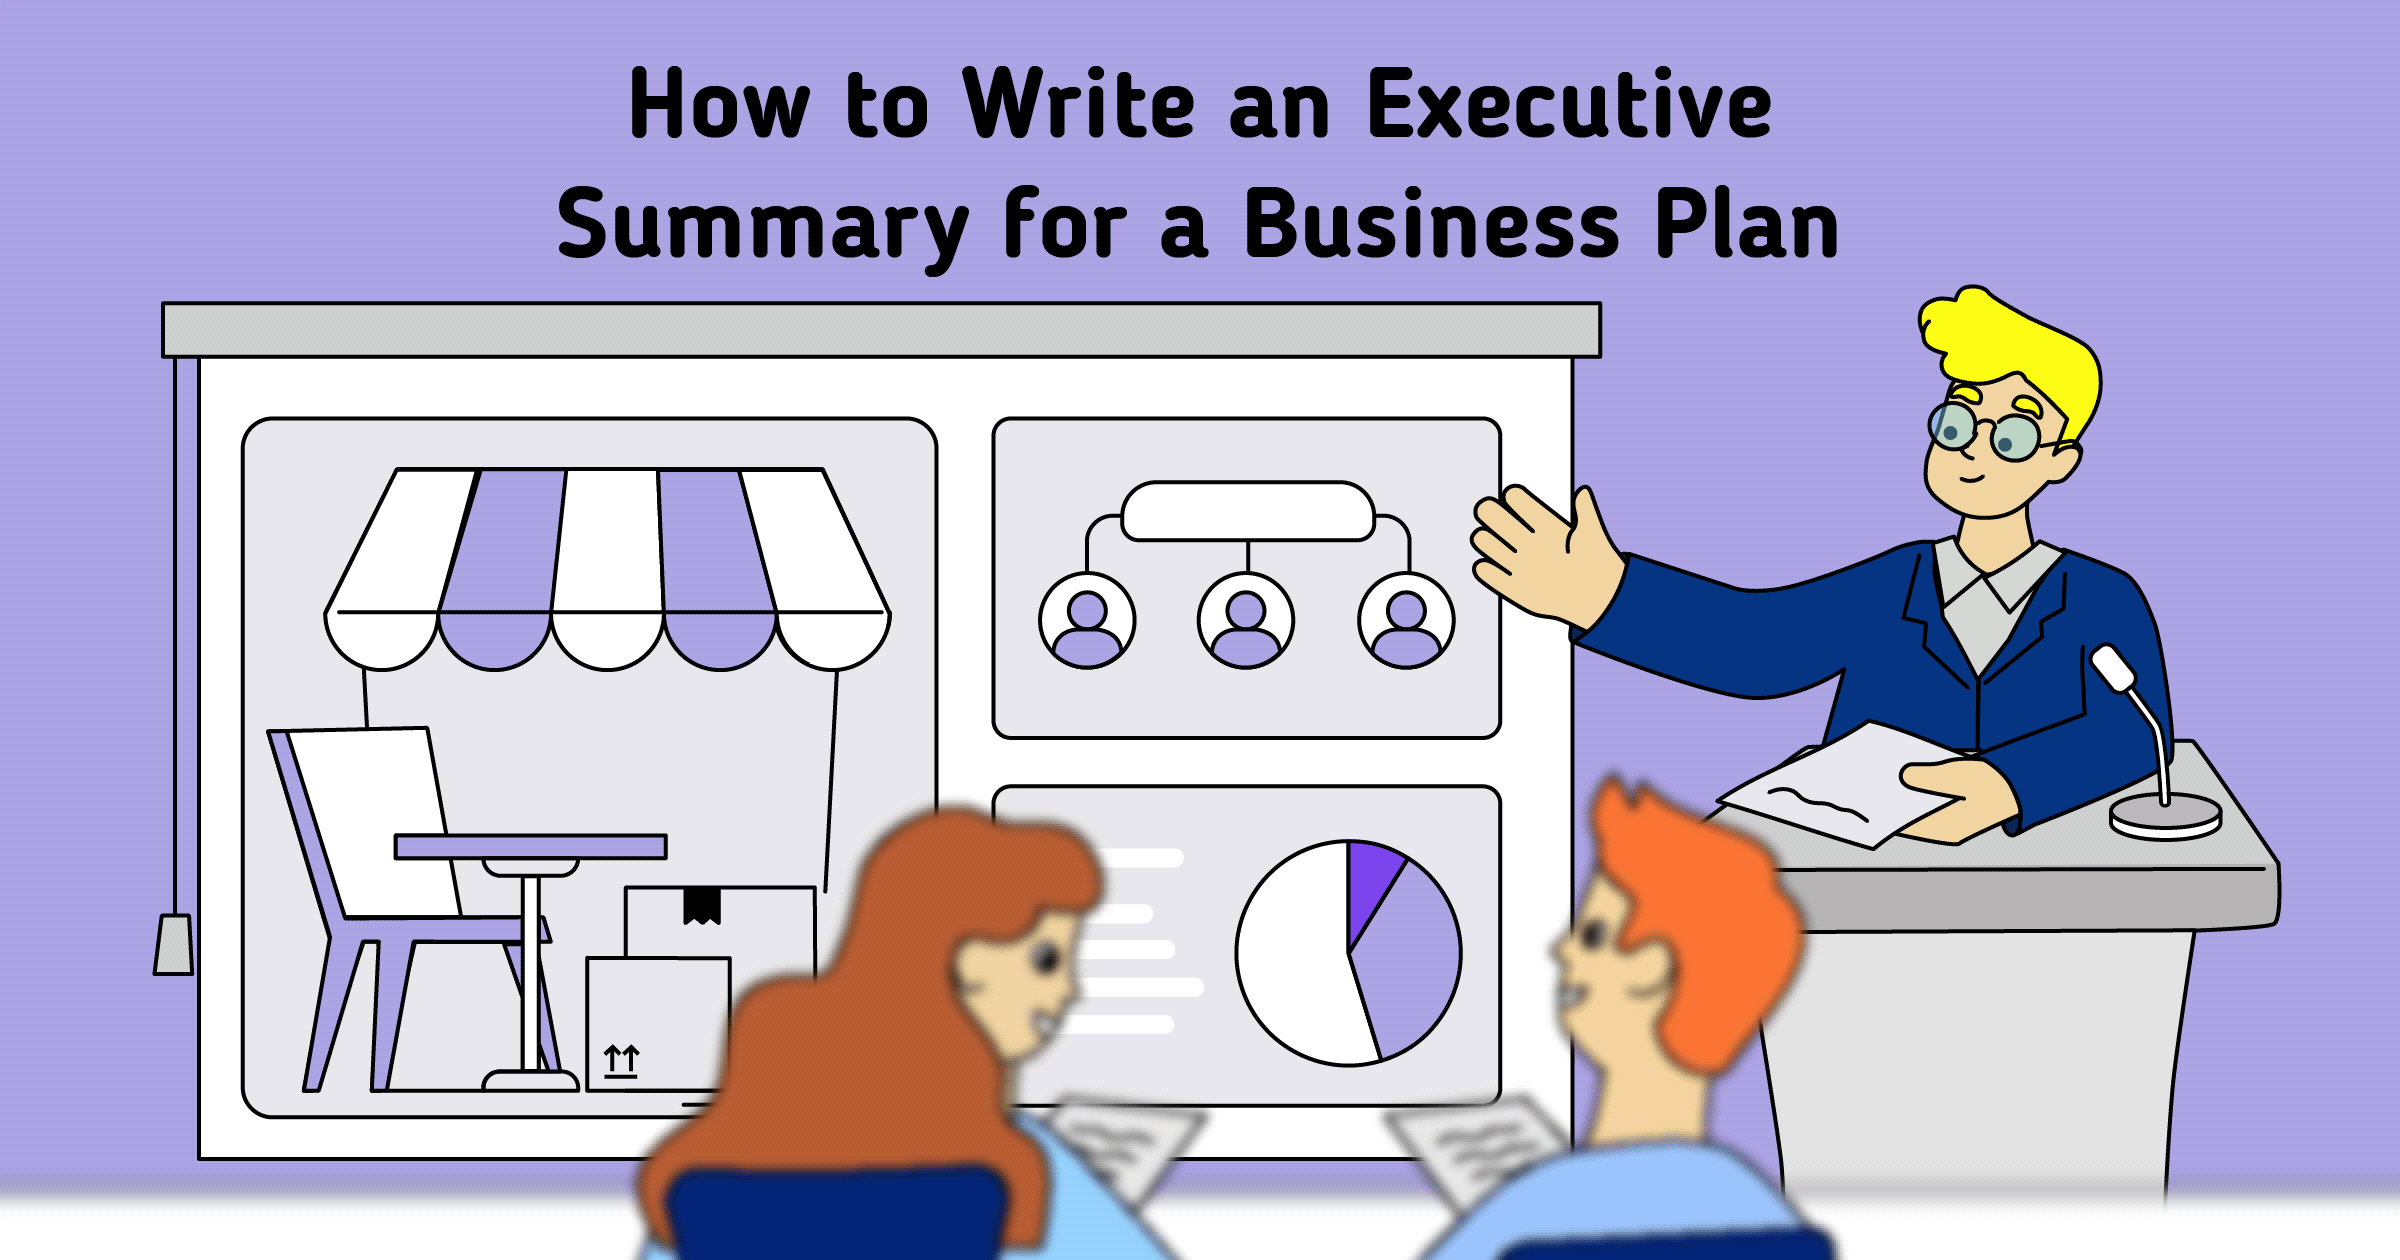 why is the executive summary the most important section of the business plan